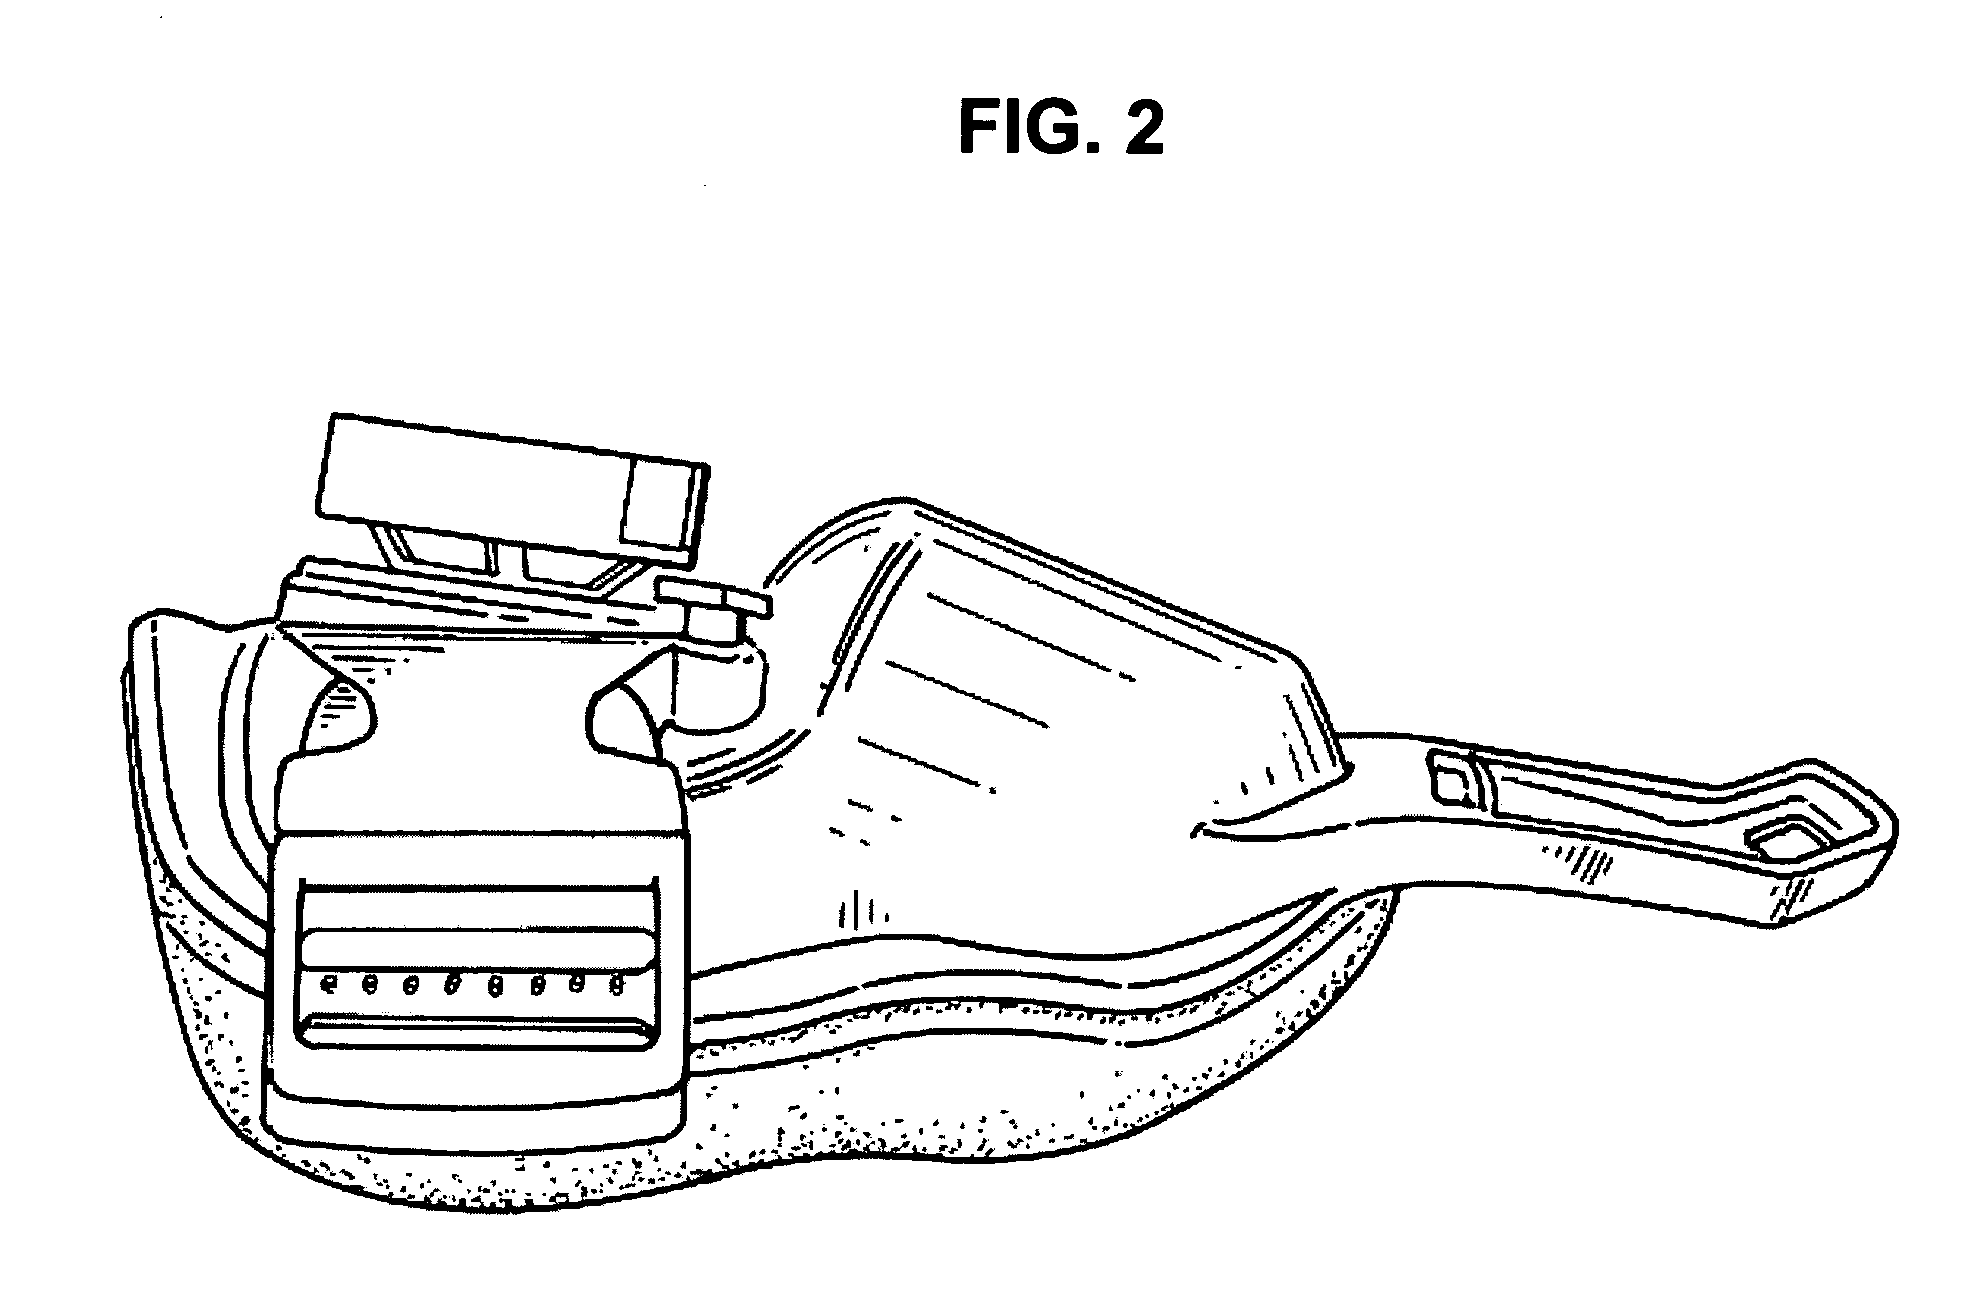 Flexible full-face mask for CPAP treatment